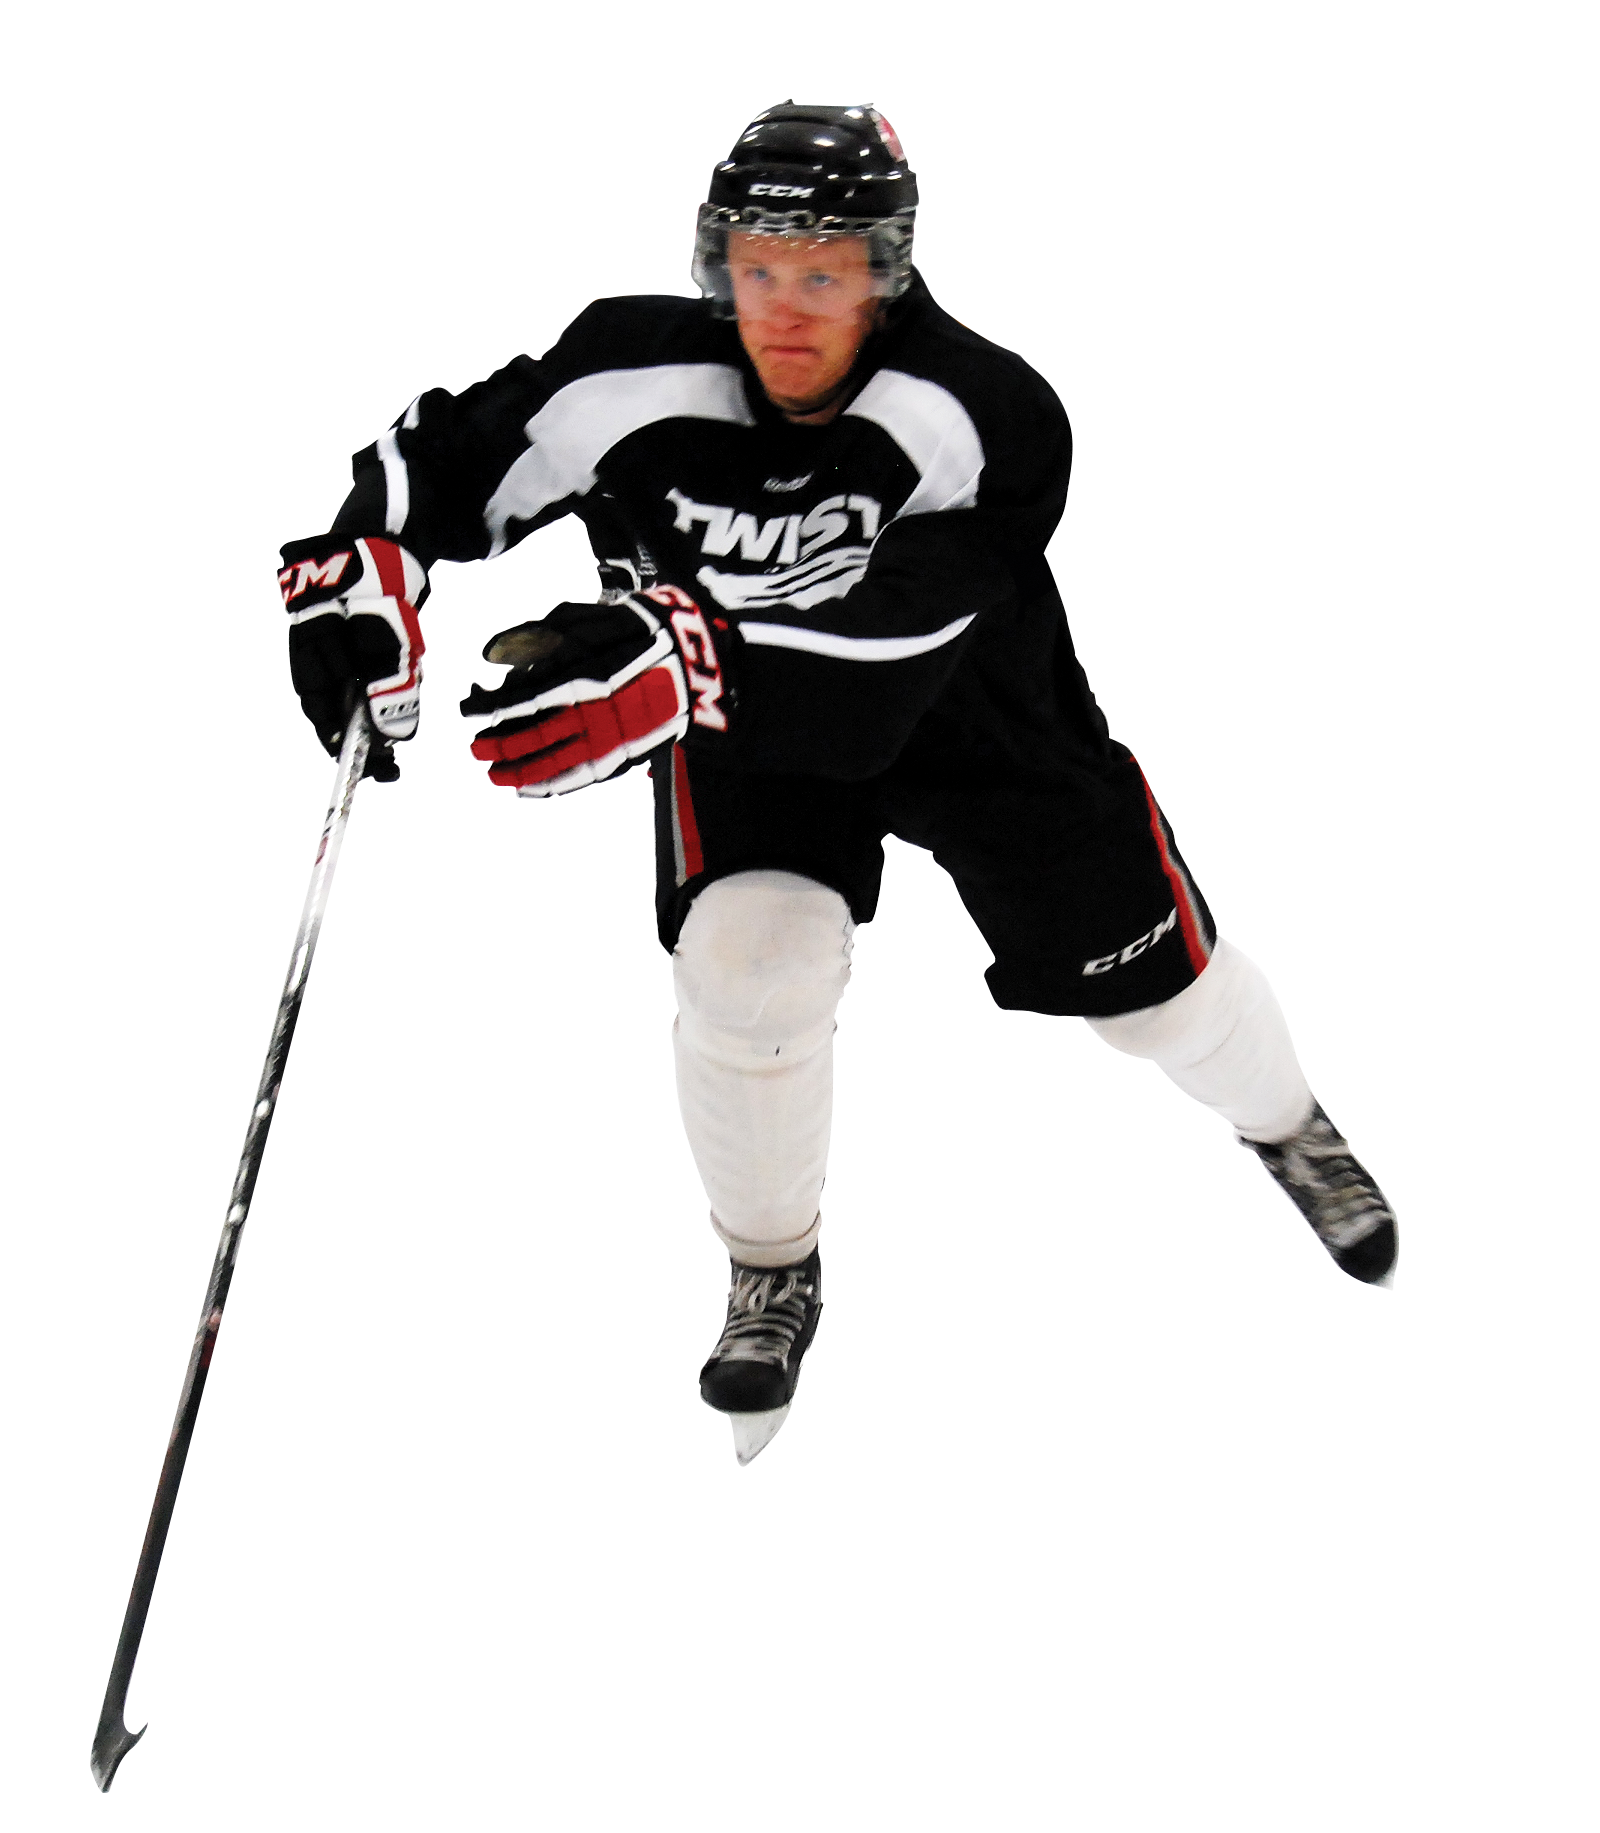 Player Hockey Photos Free Download Image PNG Image